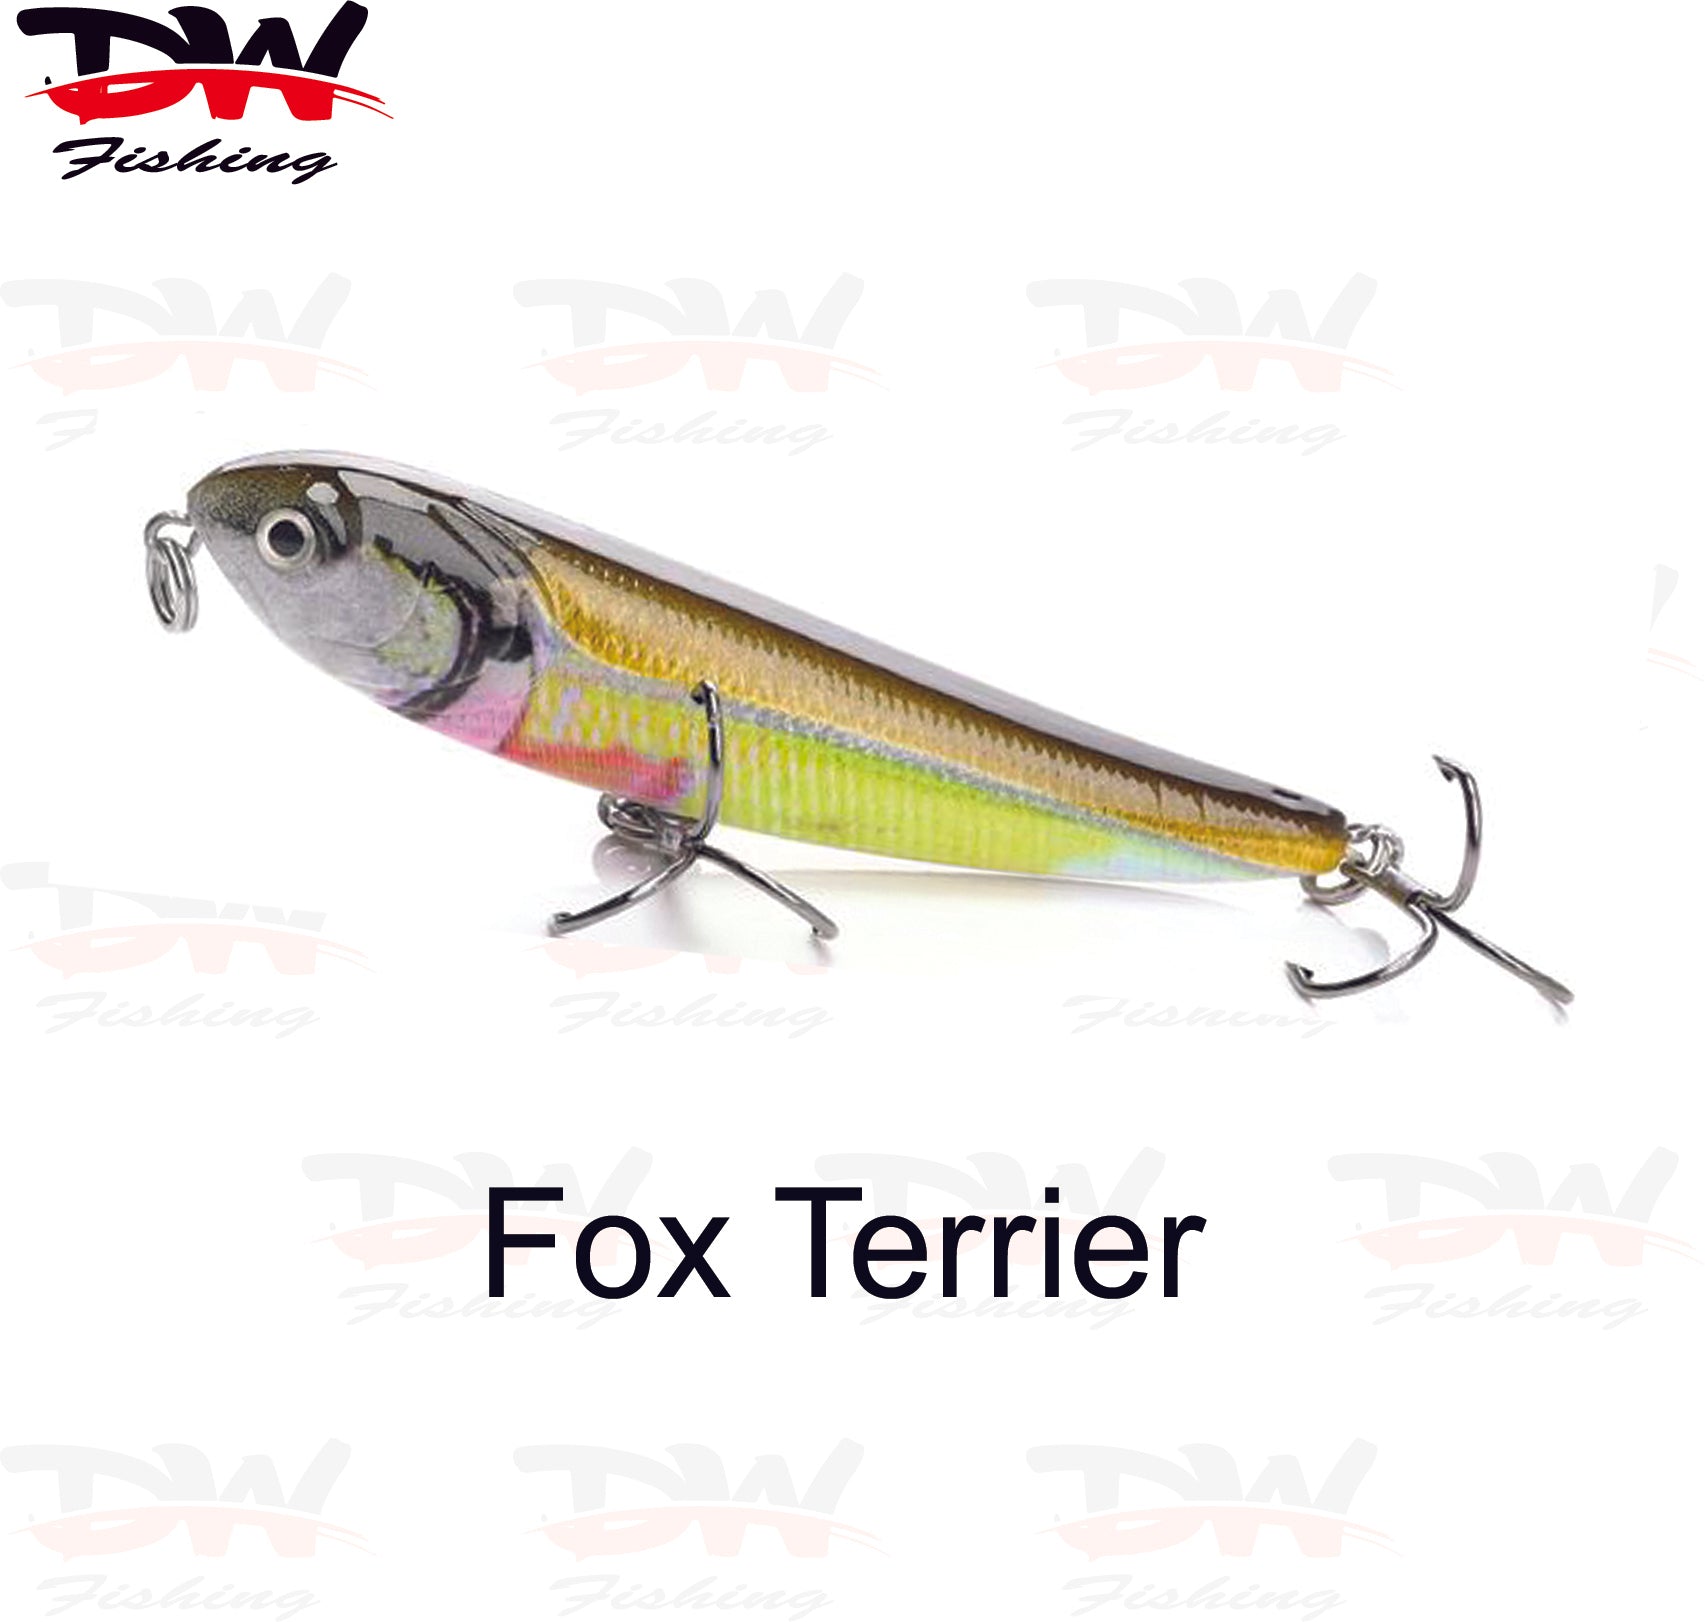 Walk the dog surface lure Aussie dog topwater 70mm single lure Fox Terrier is the colour name